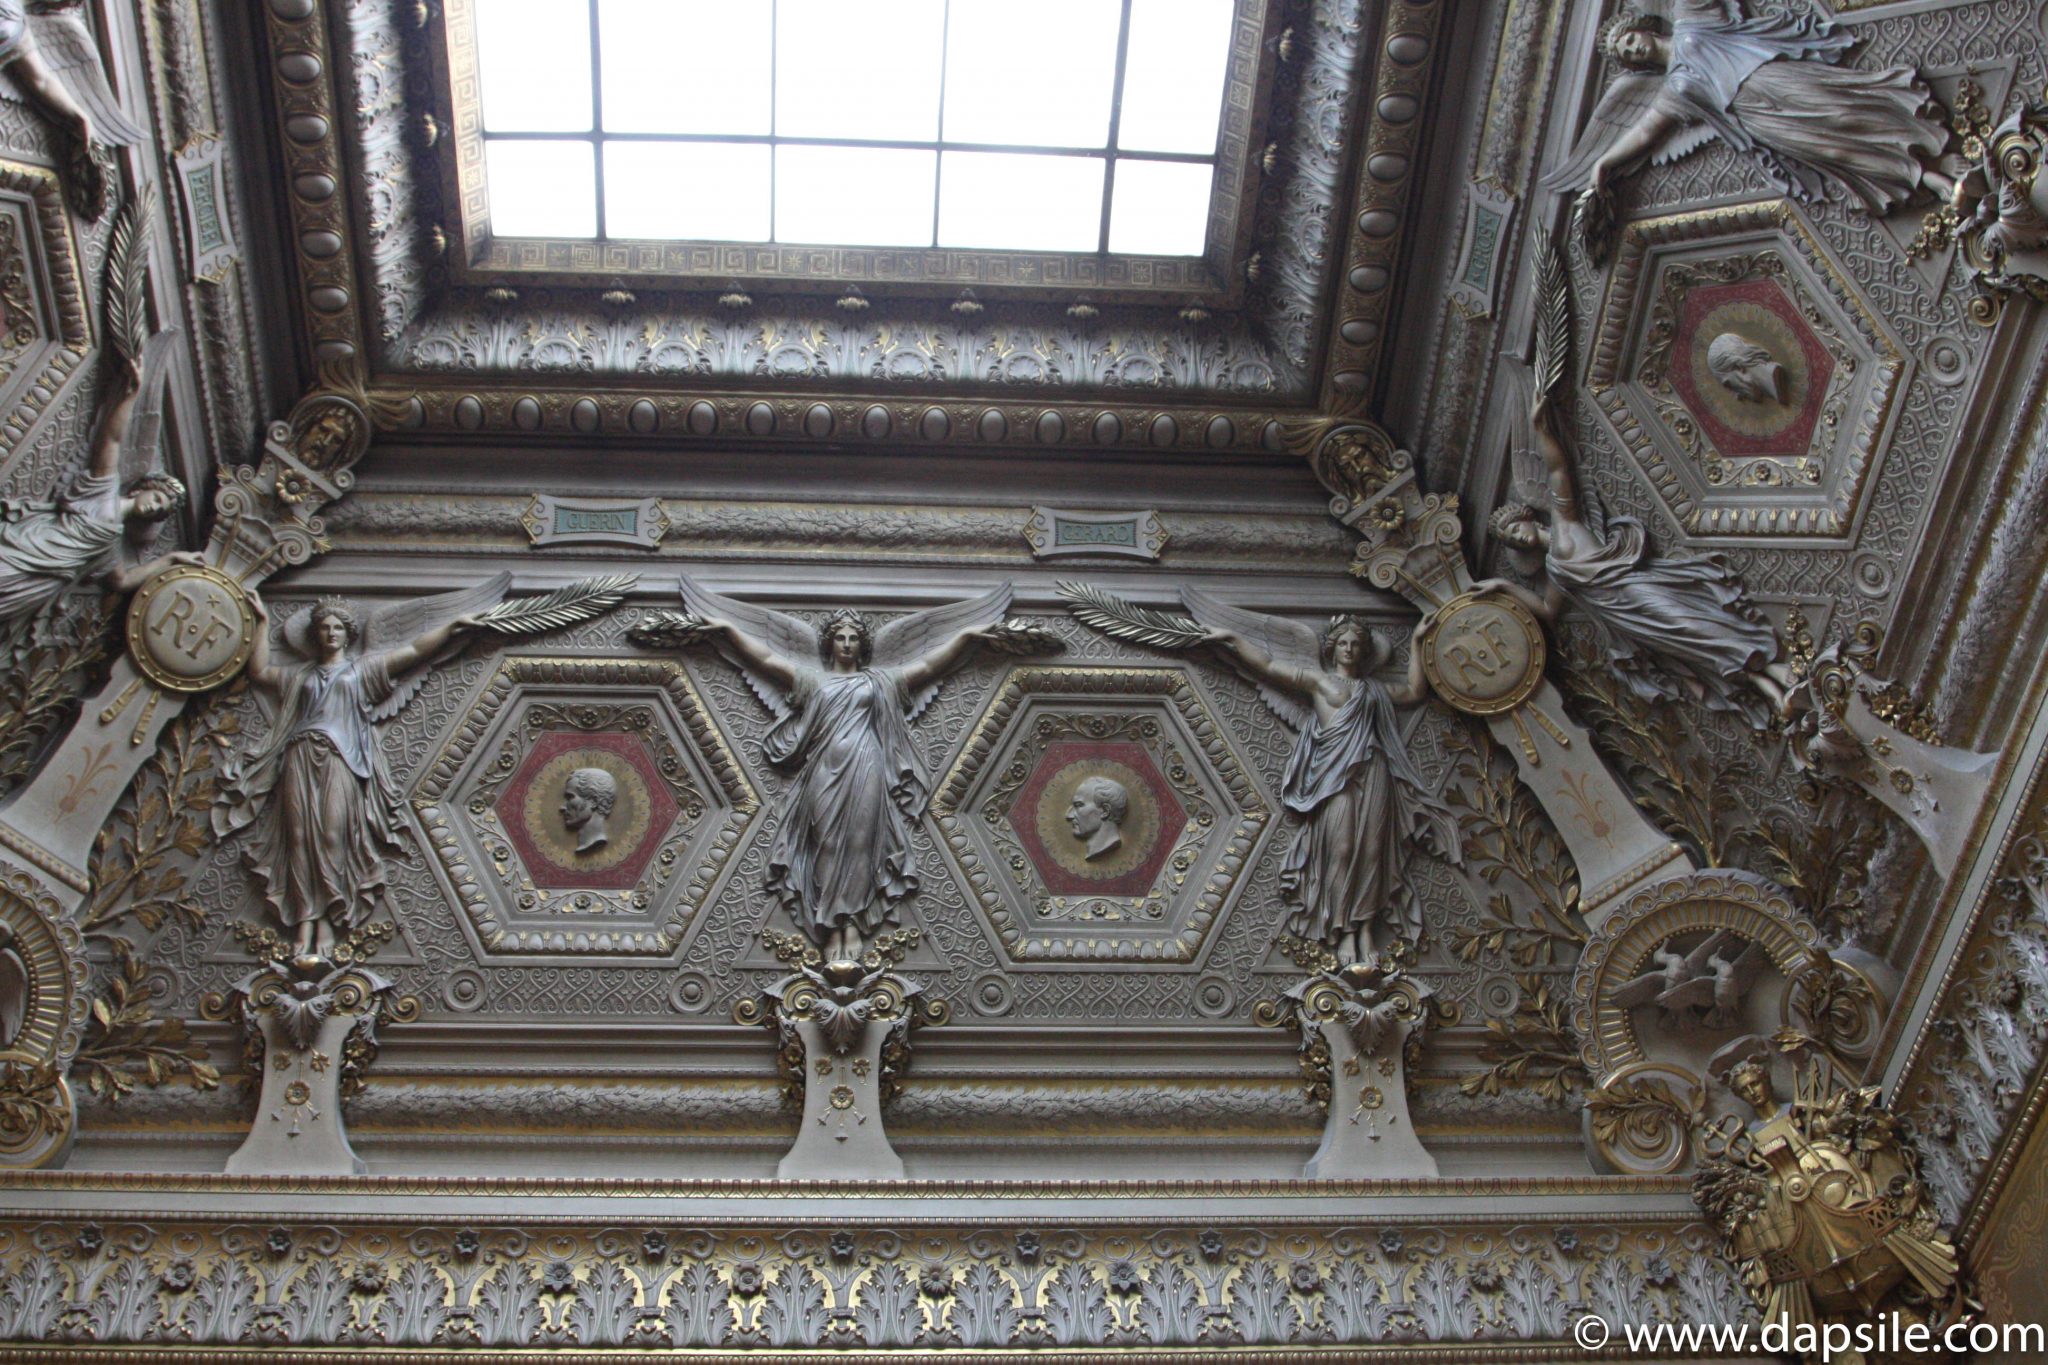 A Decorative Ceiling with a Window in the Louvre in Paris